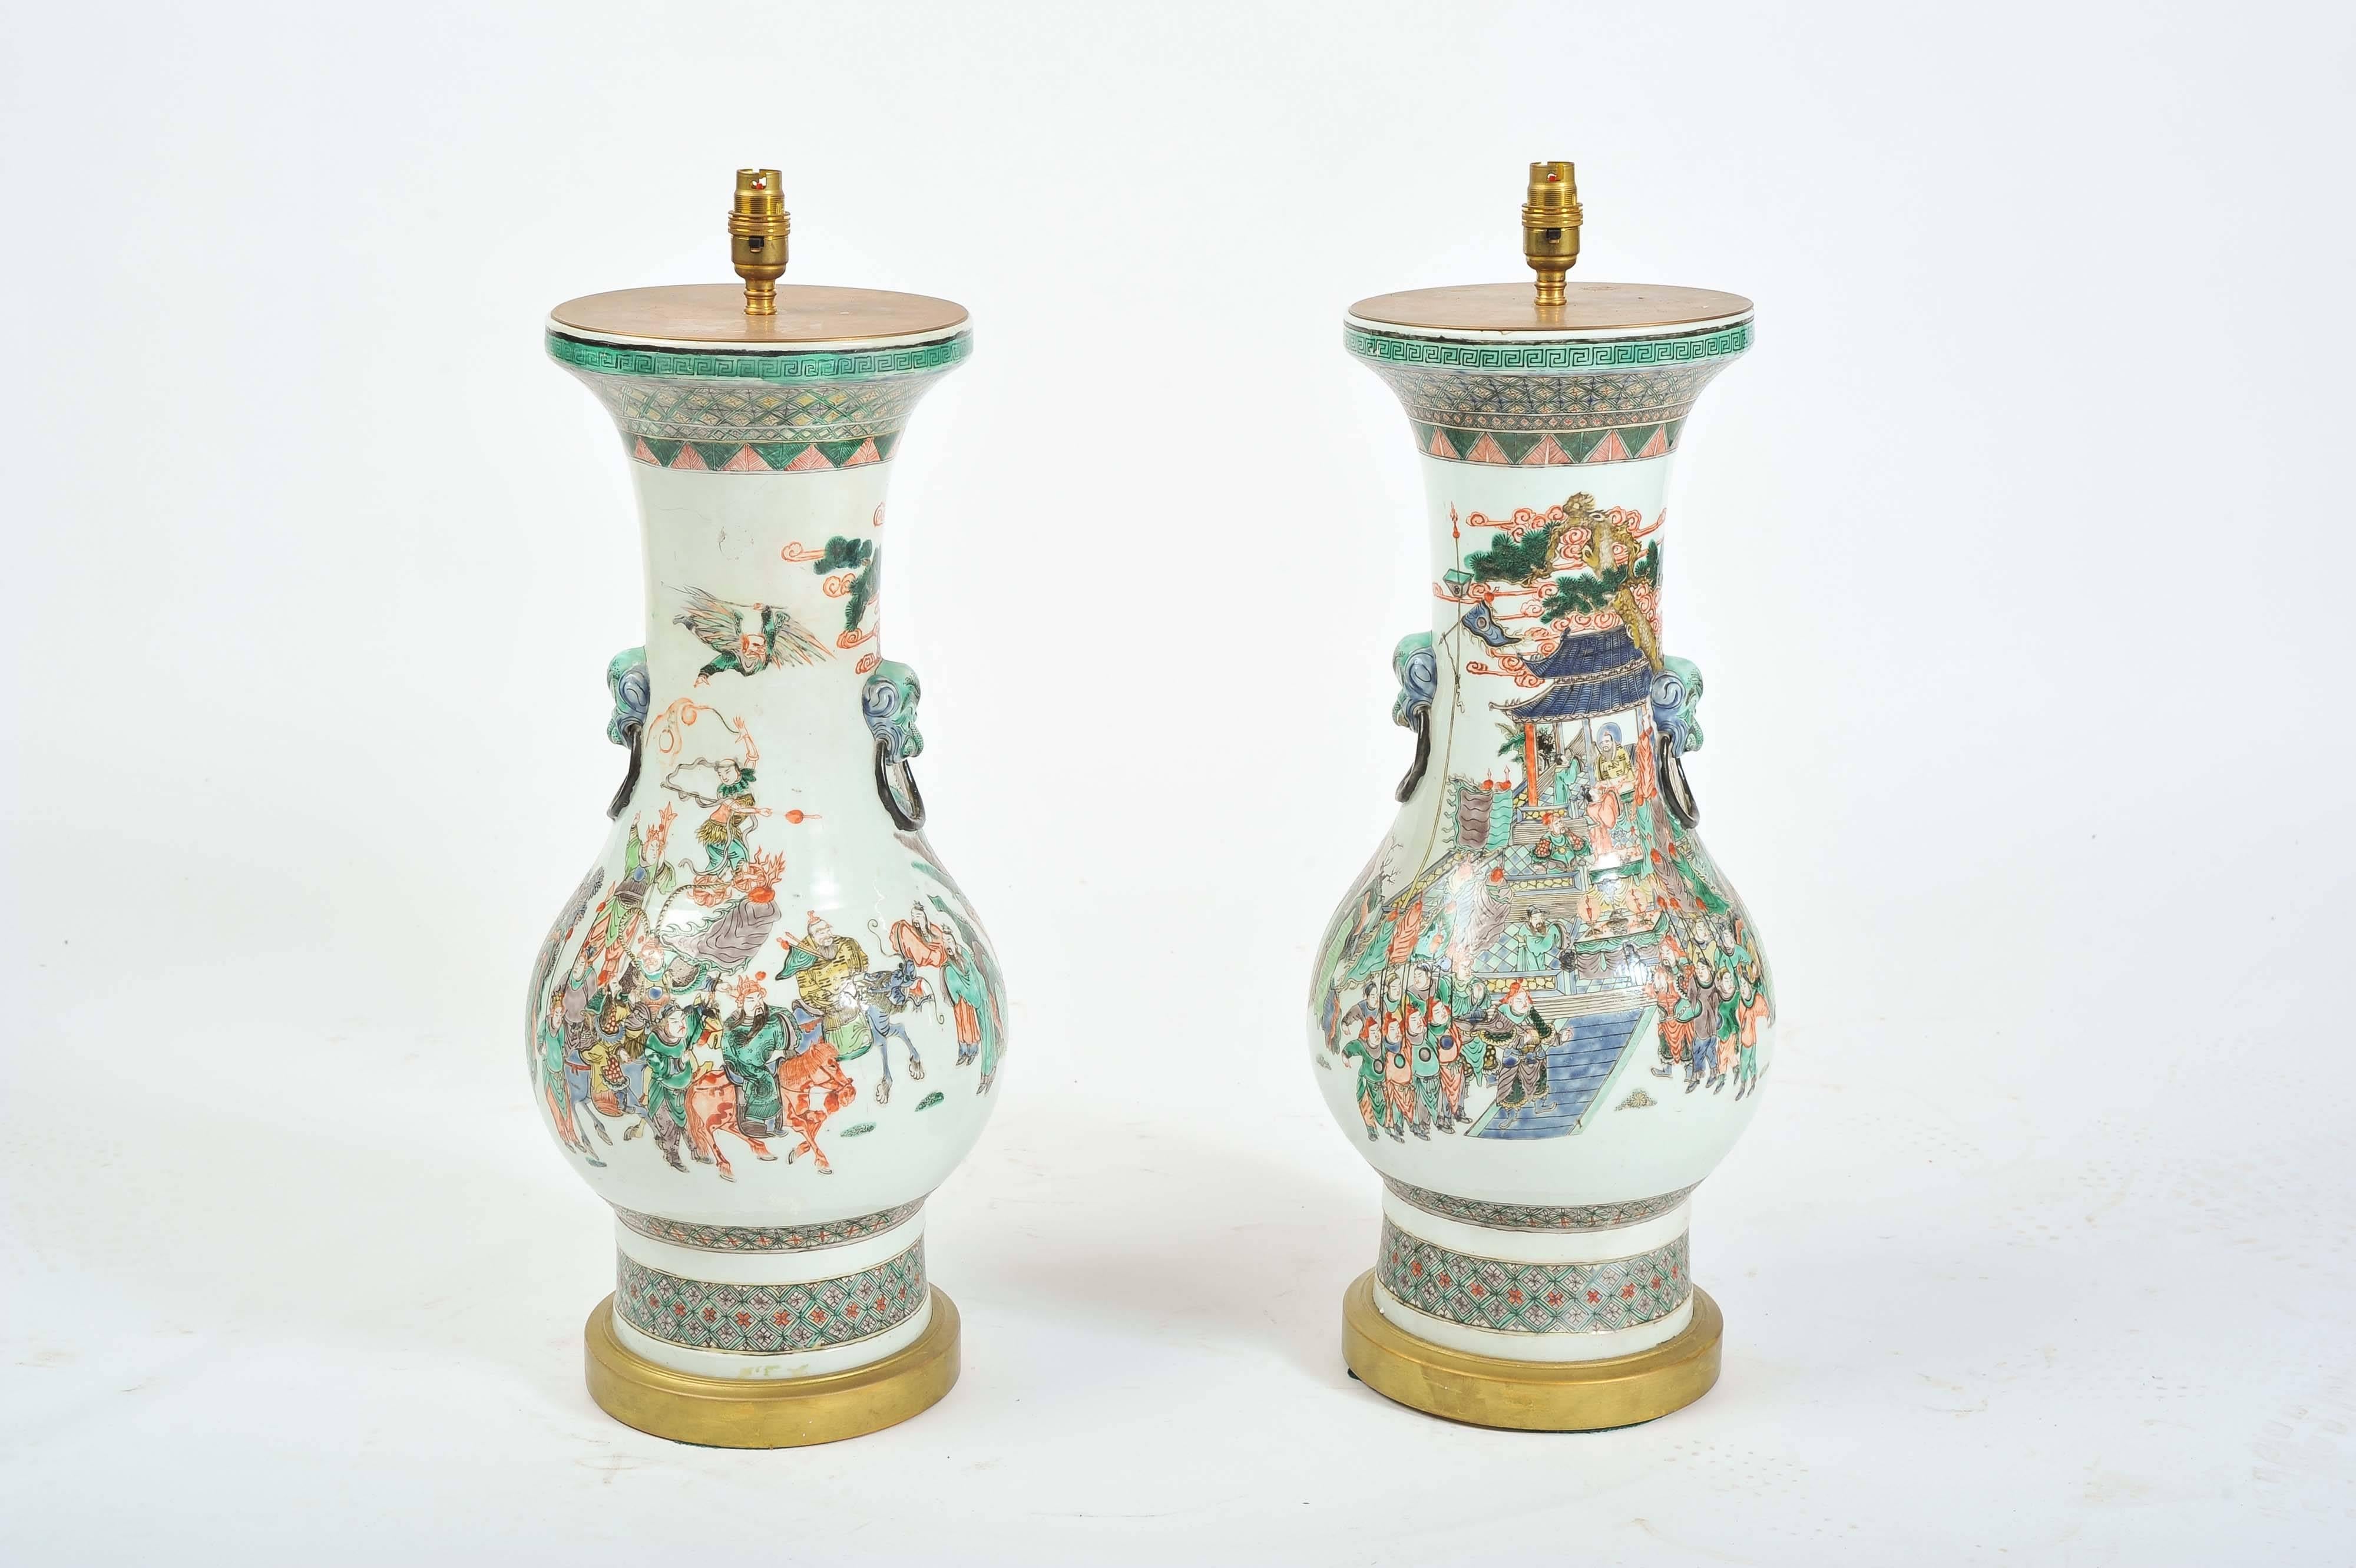 An impressive pair of Chinese 19th century Famille Verte vases/lamps. Depicting classical warrior scenes, mounted on giltwood bases.